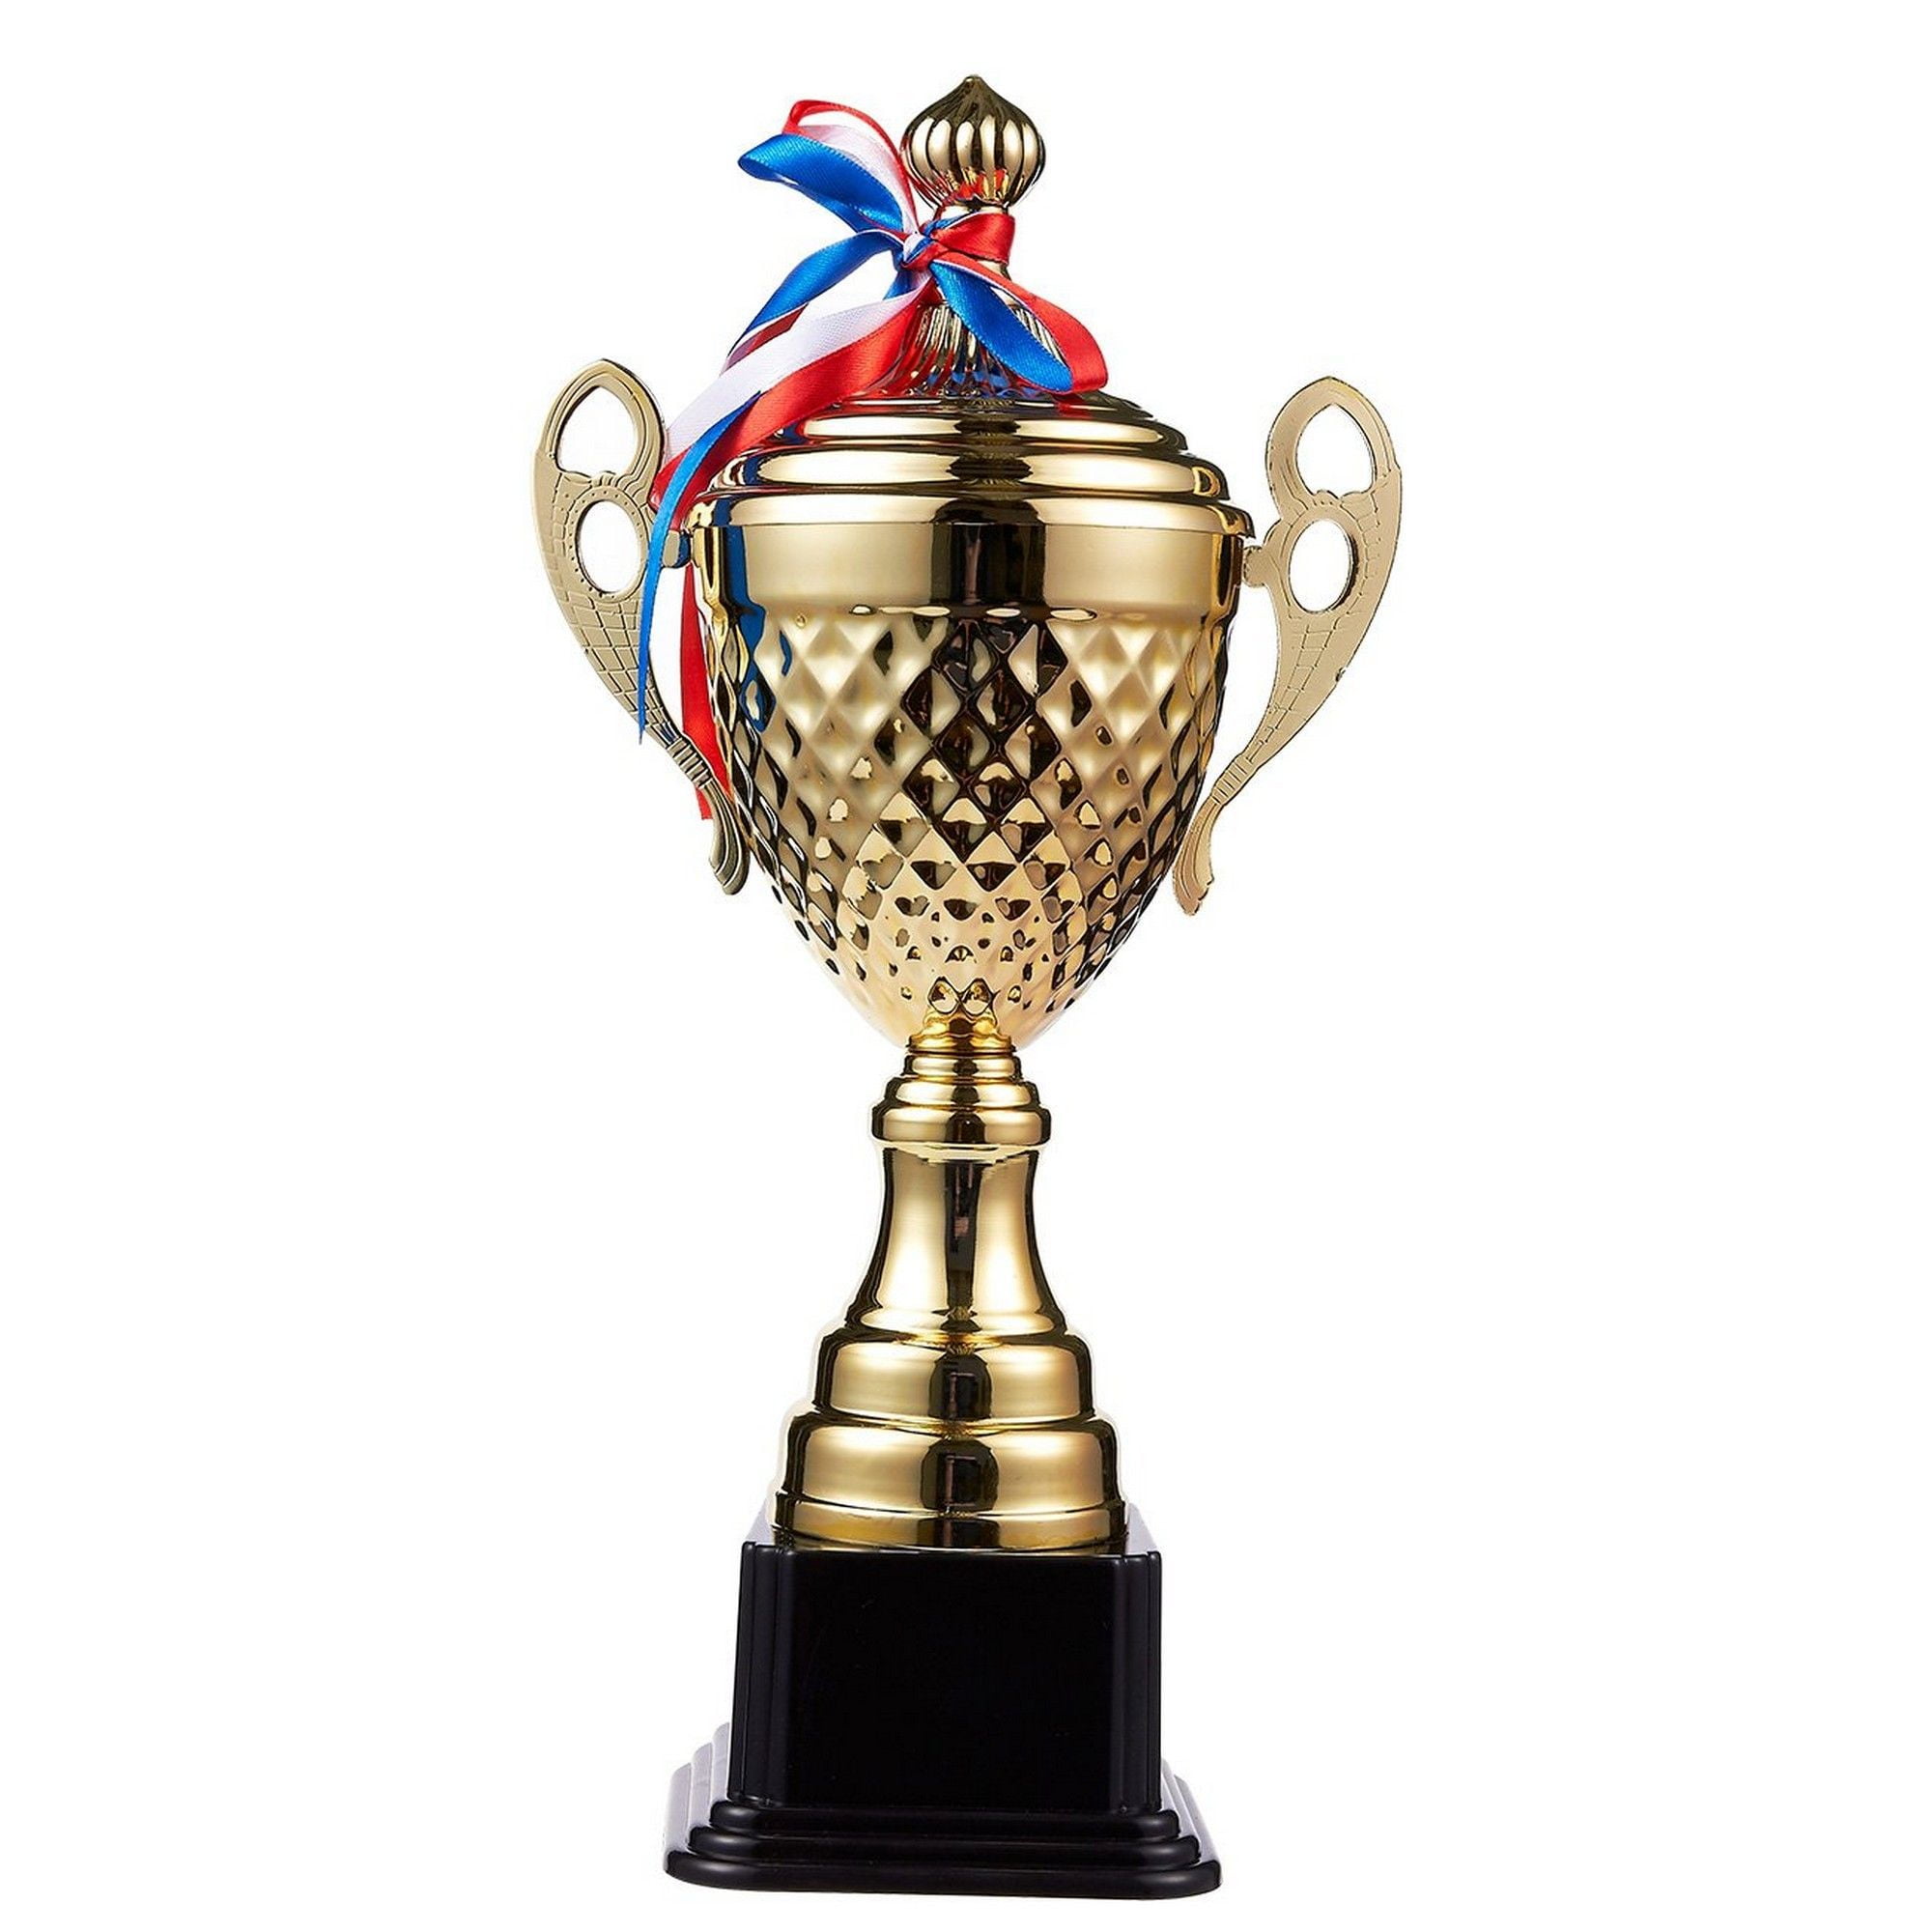 Large Trophy Cup - Gold Trophy for Sport Tournaments, Competitions